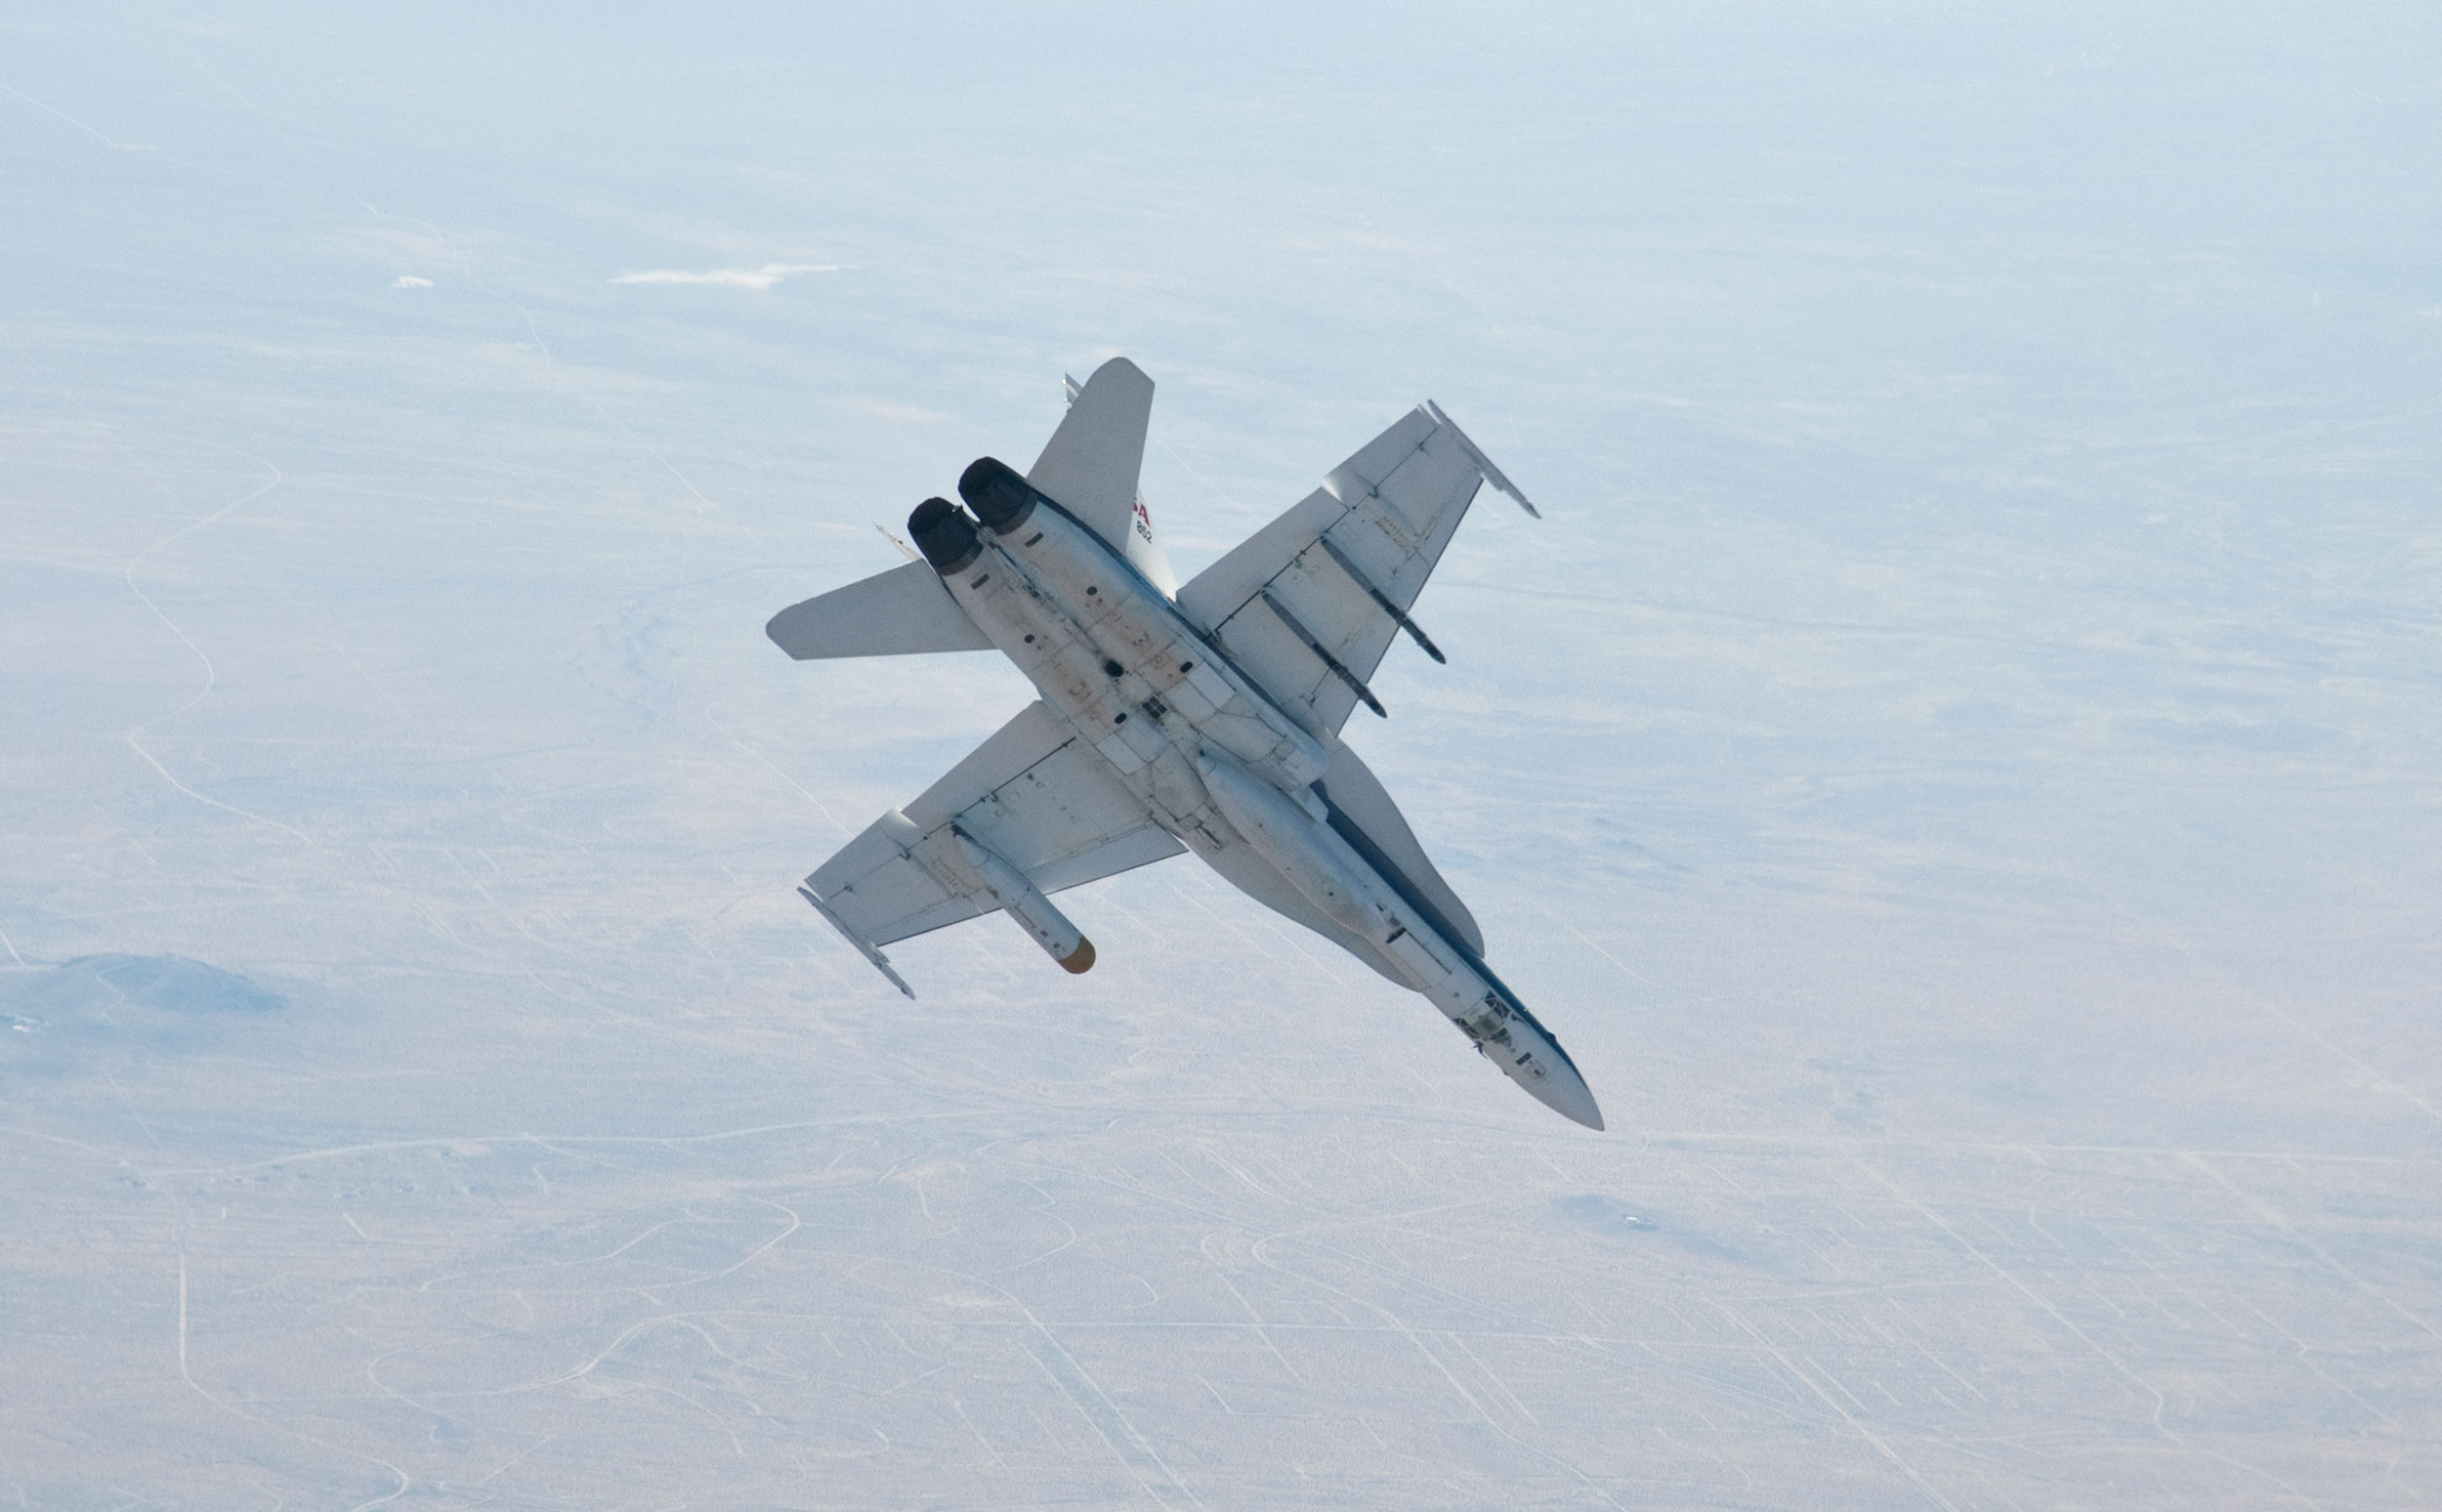 A NASA Dryden Flight Research Center F/A-18 852 aircraft performs a roll during a dive toward Rogers Dry Lake at Edwards Air Force Base, Calif., during June 2011 flight tests of a Mars landing radar.